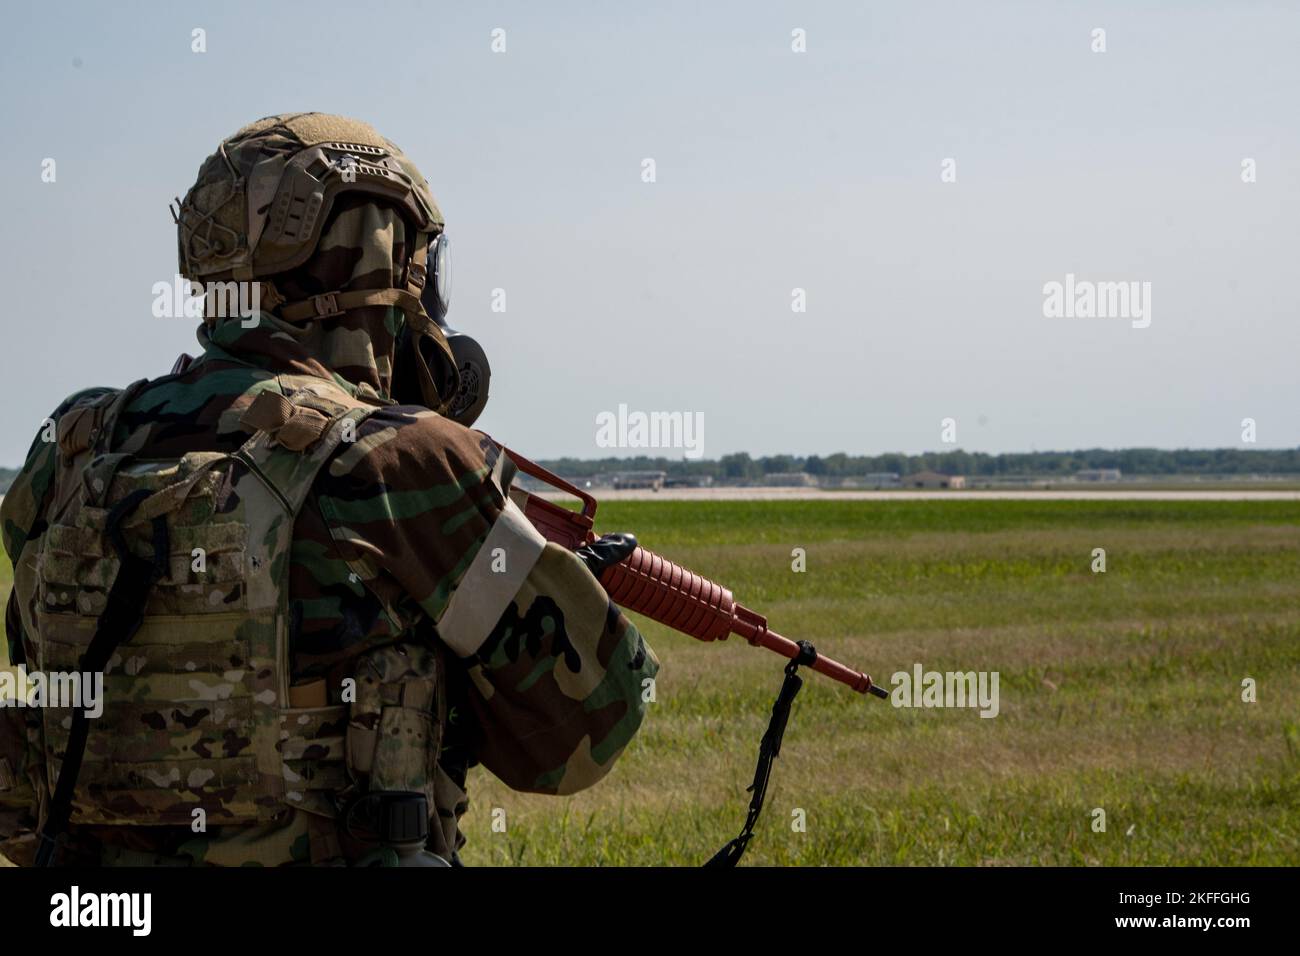 A U.S. Air Force 509th Bomb Wing Security Forces member, secures the exercise area during a Chemical, Biological, Radiological, Nuclear exercise at Whiteman Air Force Base, Missouri, Sept. 14, 2022. Airmen participate in a CBRN exercise to deter and win against adversaries. Stock Photo